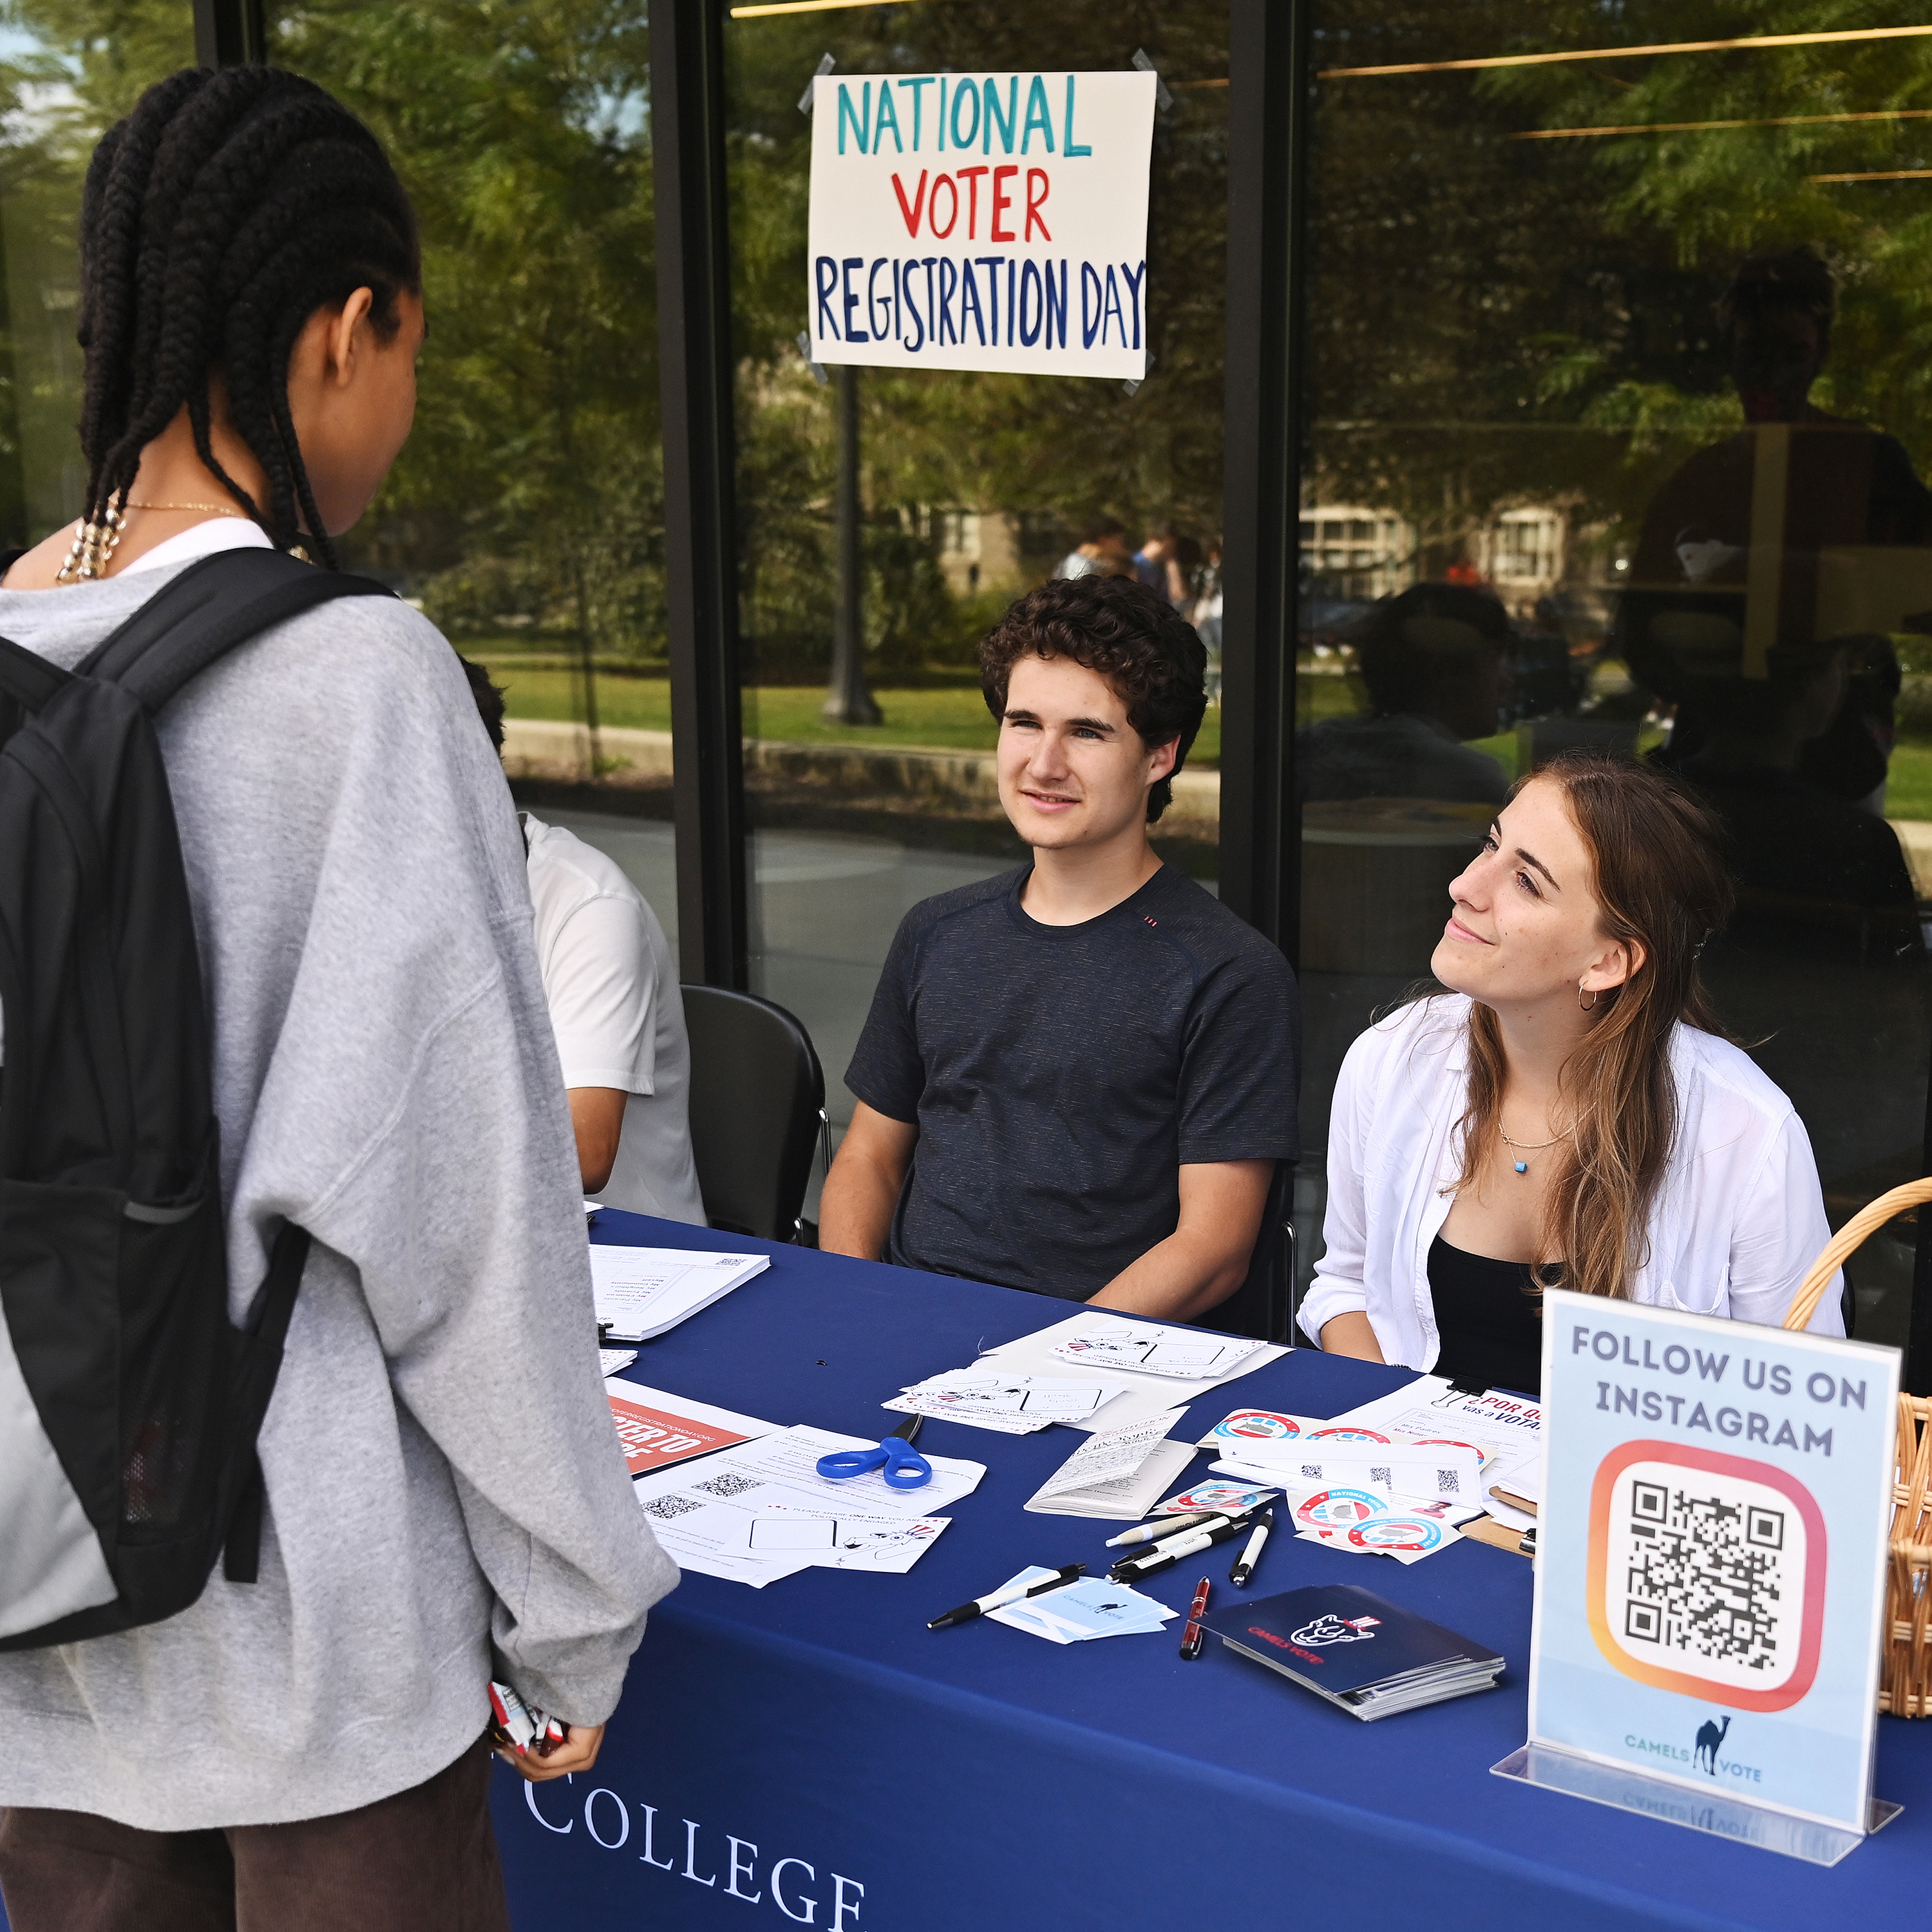 Two students seated at a table run a voter registration drive.